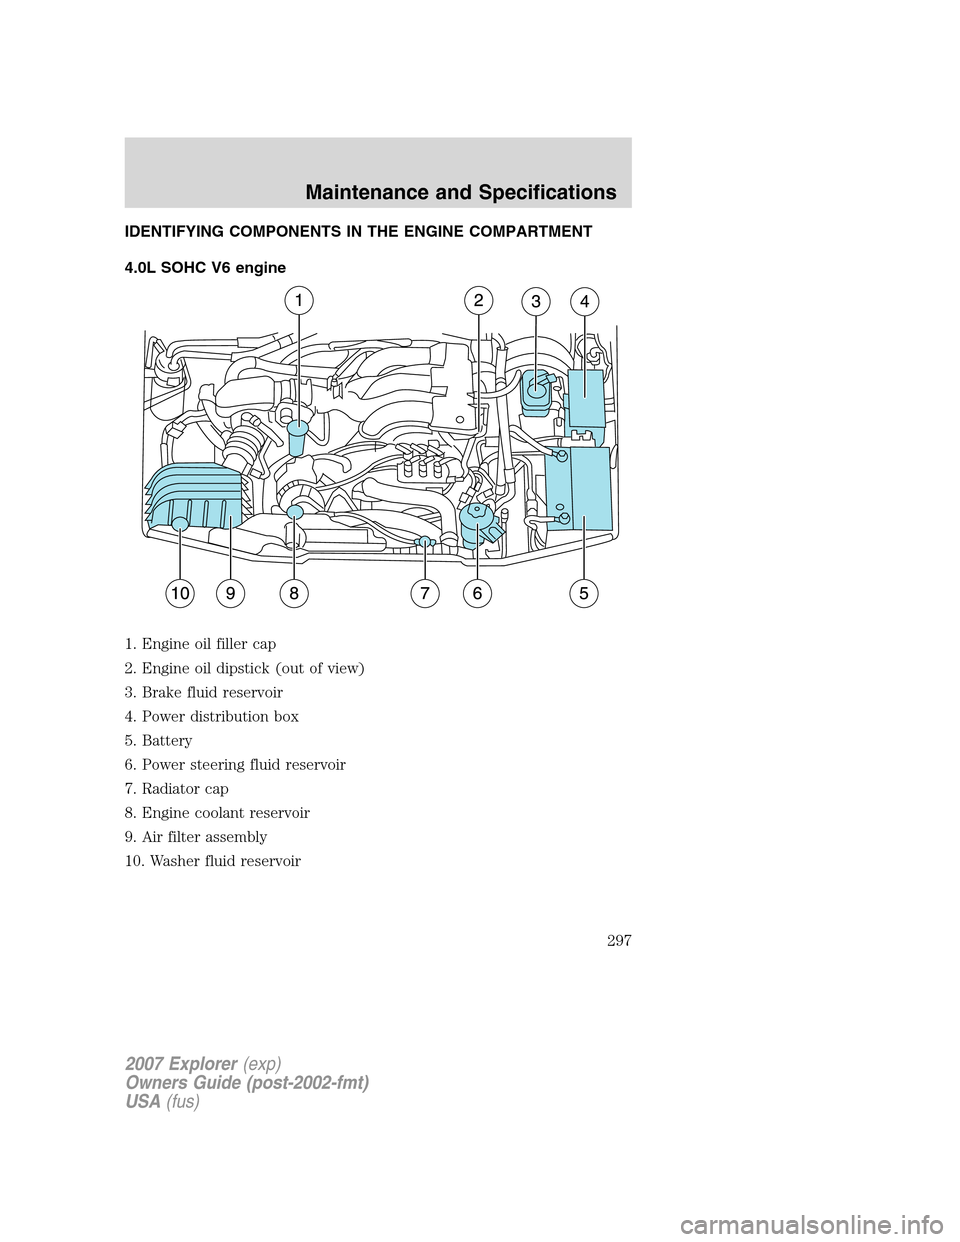 FORD EXPLORER 2007 4.G Owners Manual IDENTIFYING COMPONENTS IN THE ENGINE COMPARTMENT
4.0L SOHC V6 engine
1. Engine oil filler cap
2. Engine oil dipstick (out of view)
3. Brake fluid reservoir
4. Power distribution box
5. Battery
6. Powe